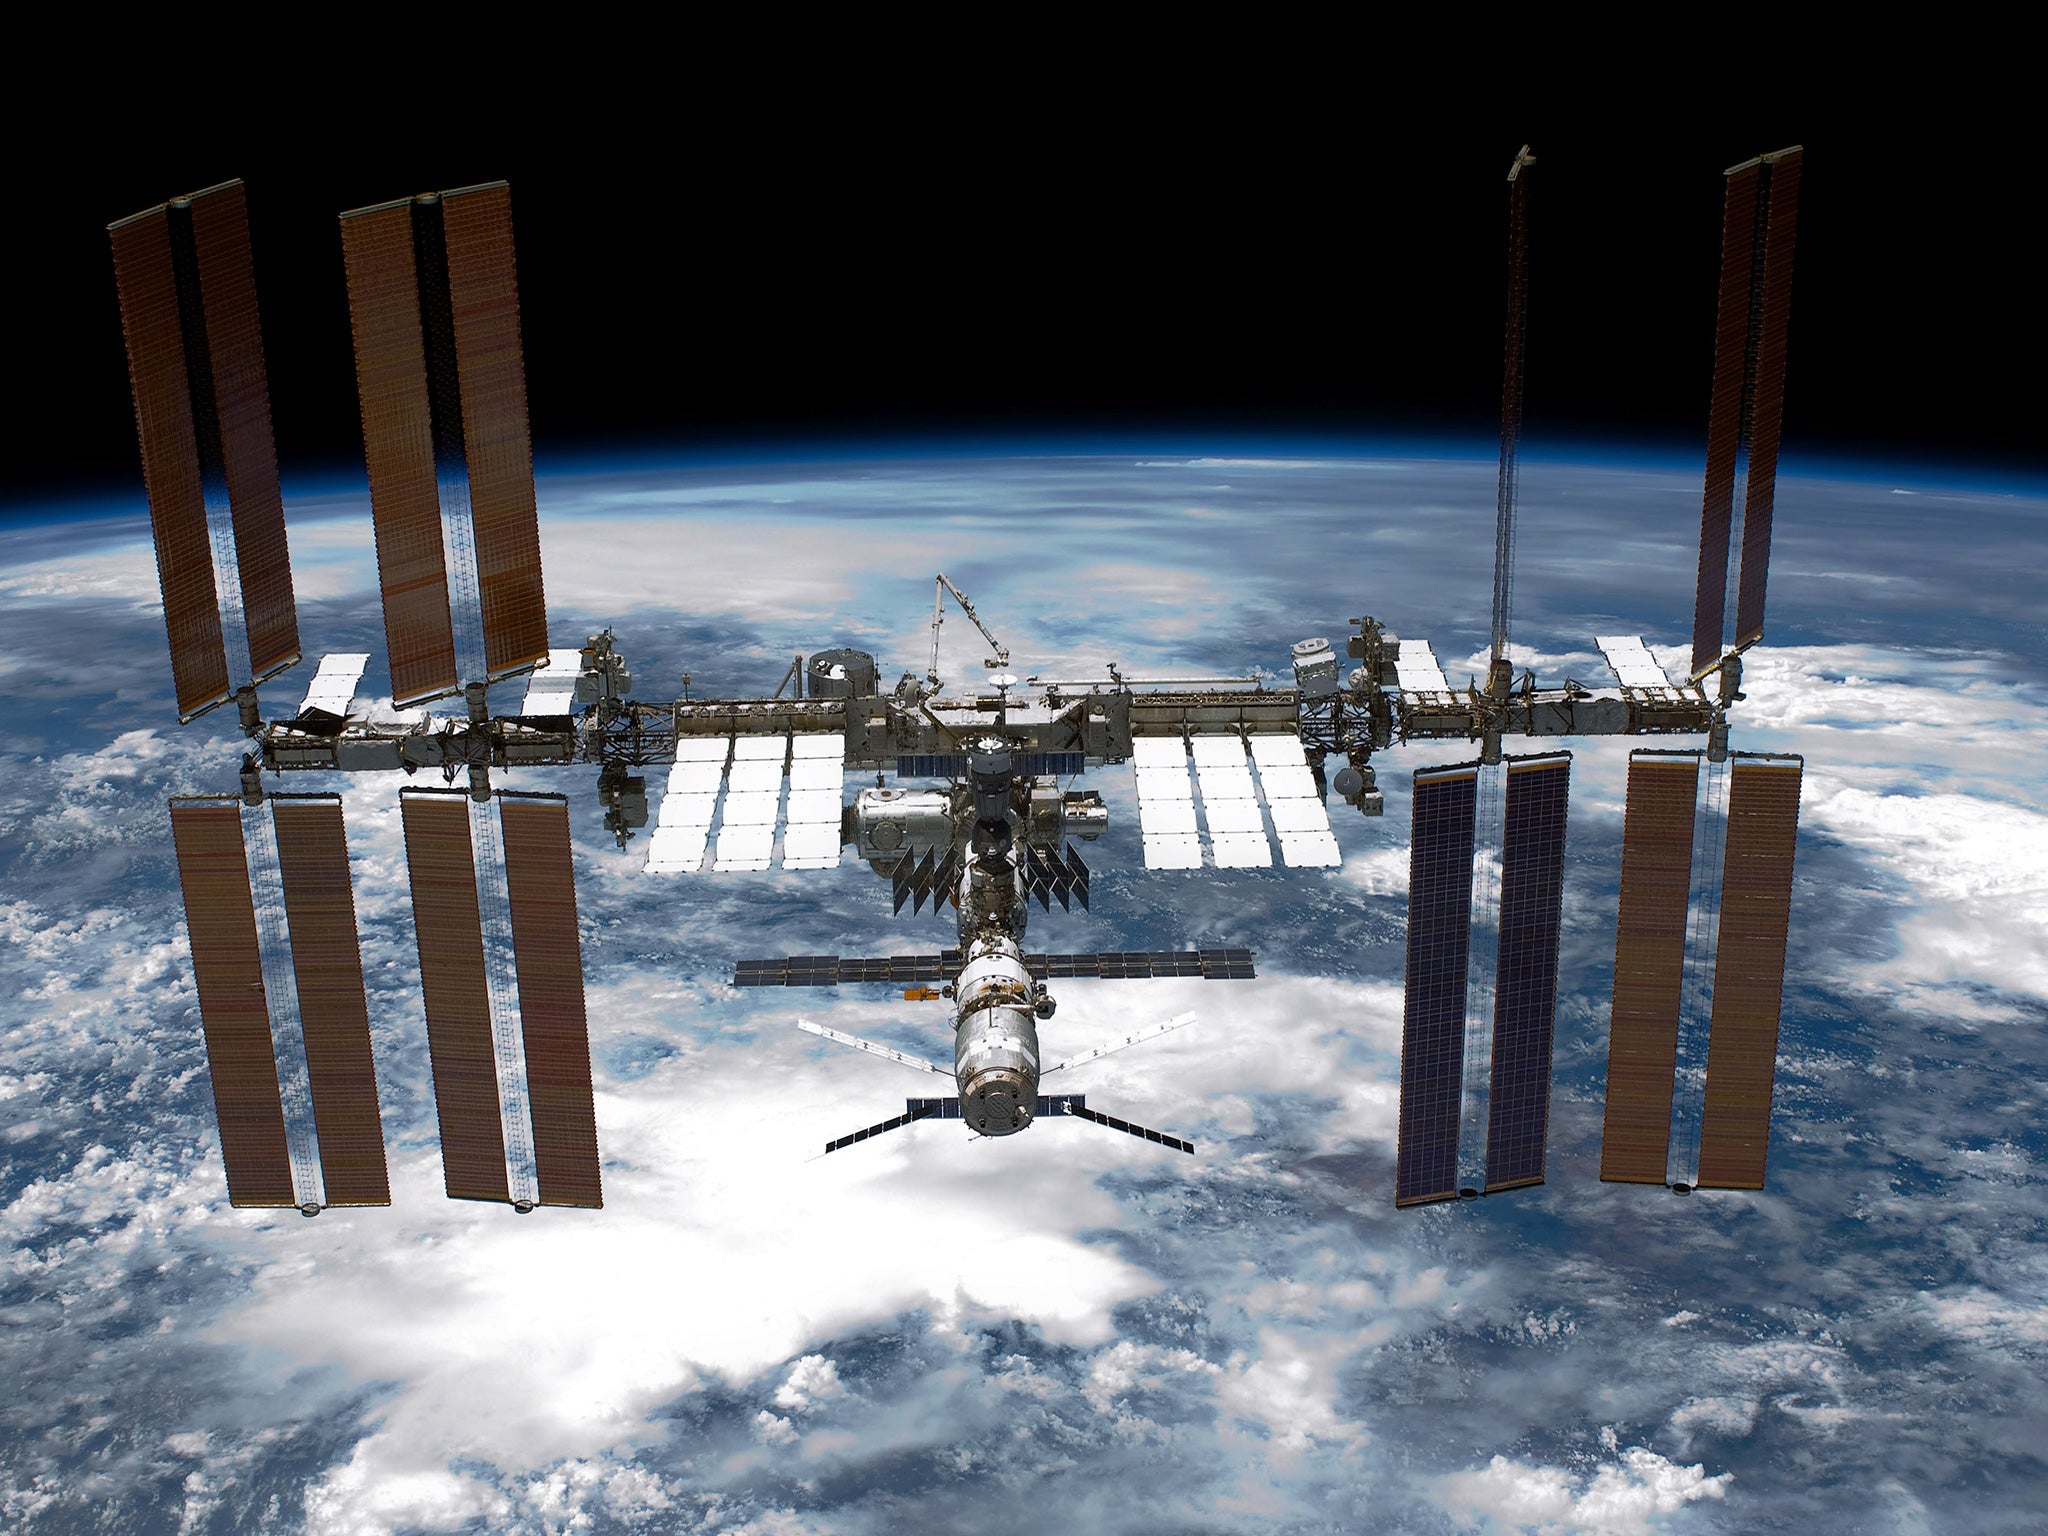 The International Space Station (ISS) as photographed from the NASA space shuttle Endeavour